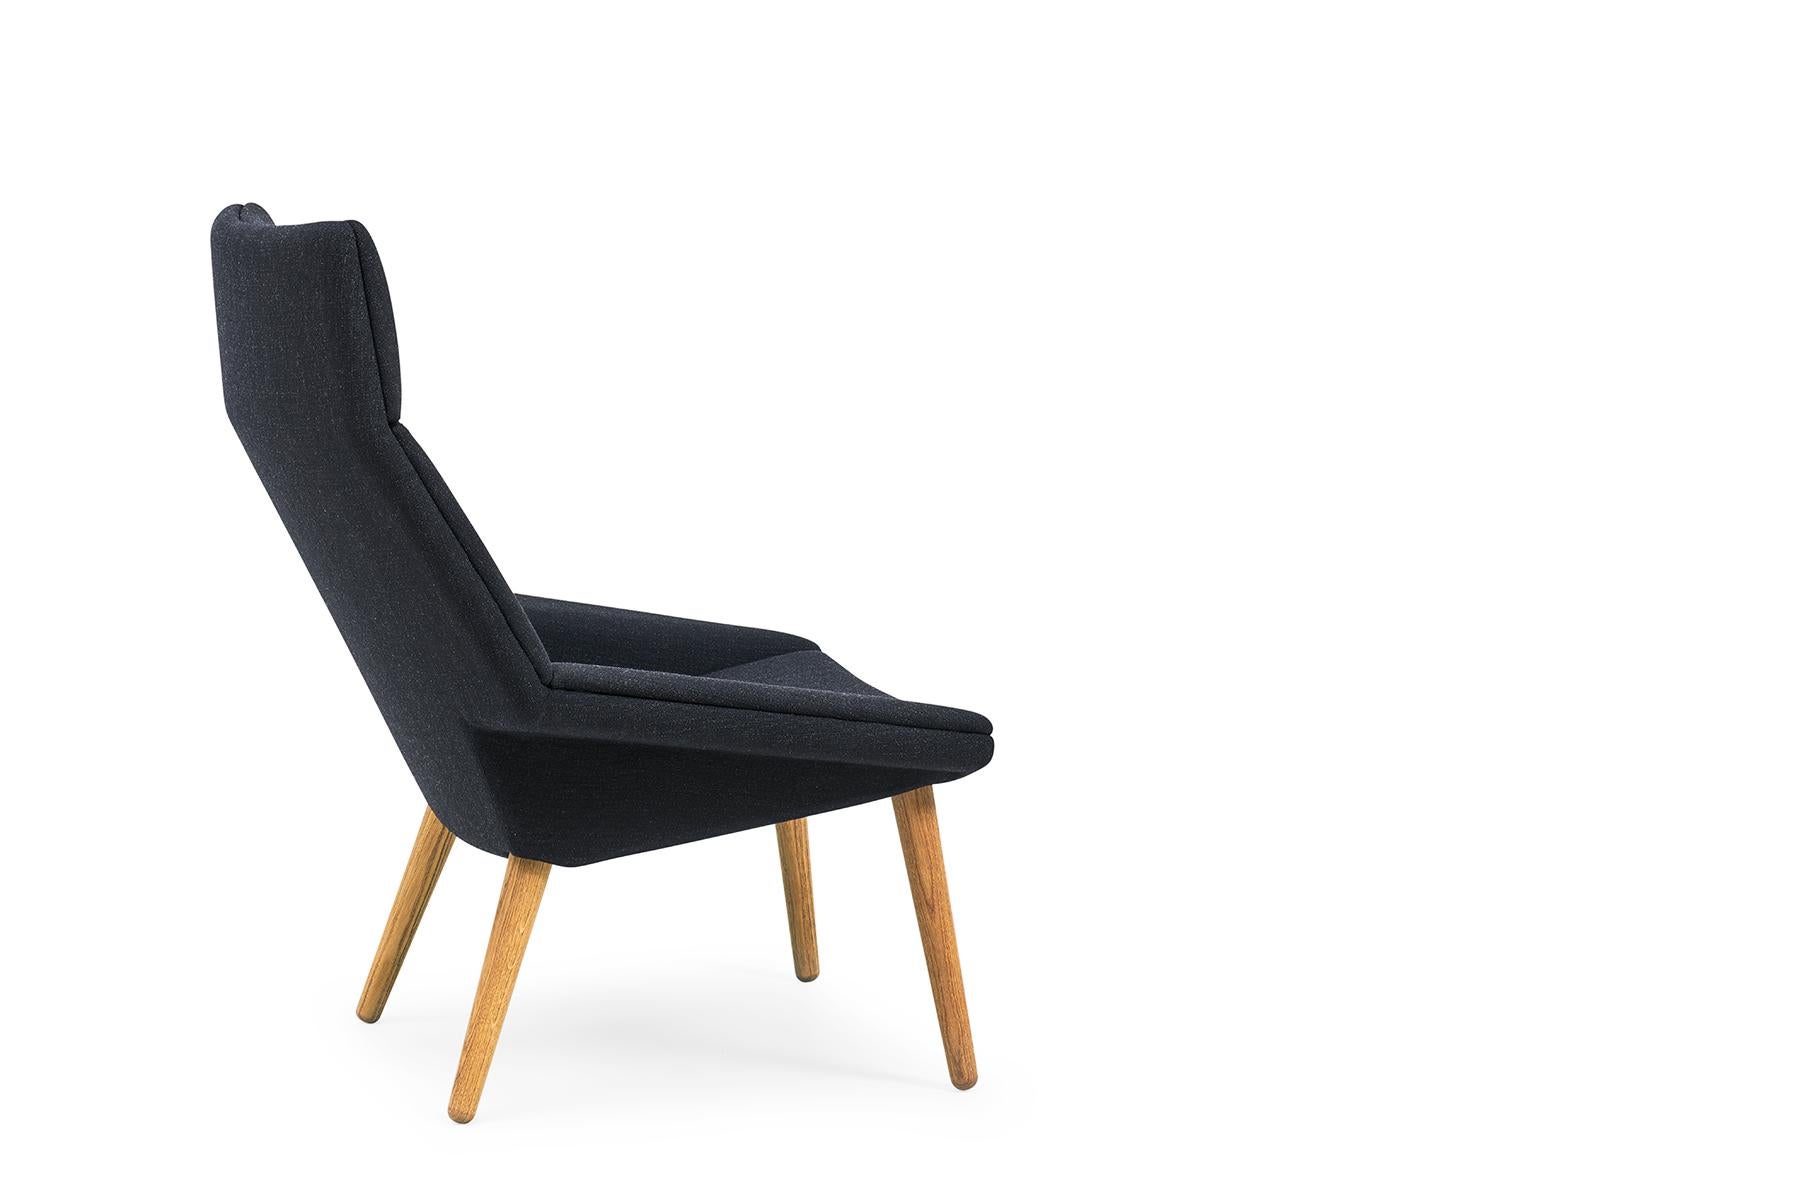 Designed by Nanna & Jørgen Ditzel in 1955, the Tux lounge chair s a wonderful addition to any modern home or office. The chair is hand built at Getama’s factory in Gedsted, Denmark by skilled cabinetmakers using traditional Scandinavian